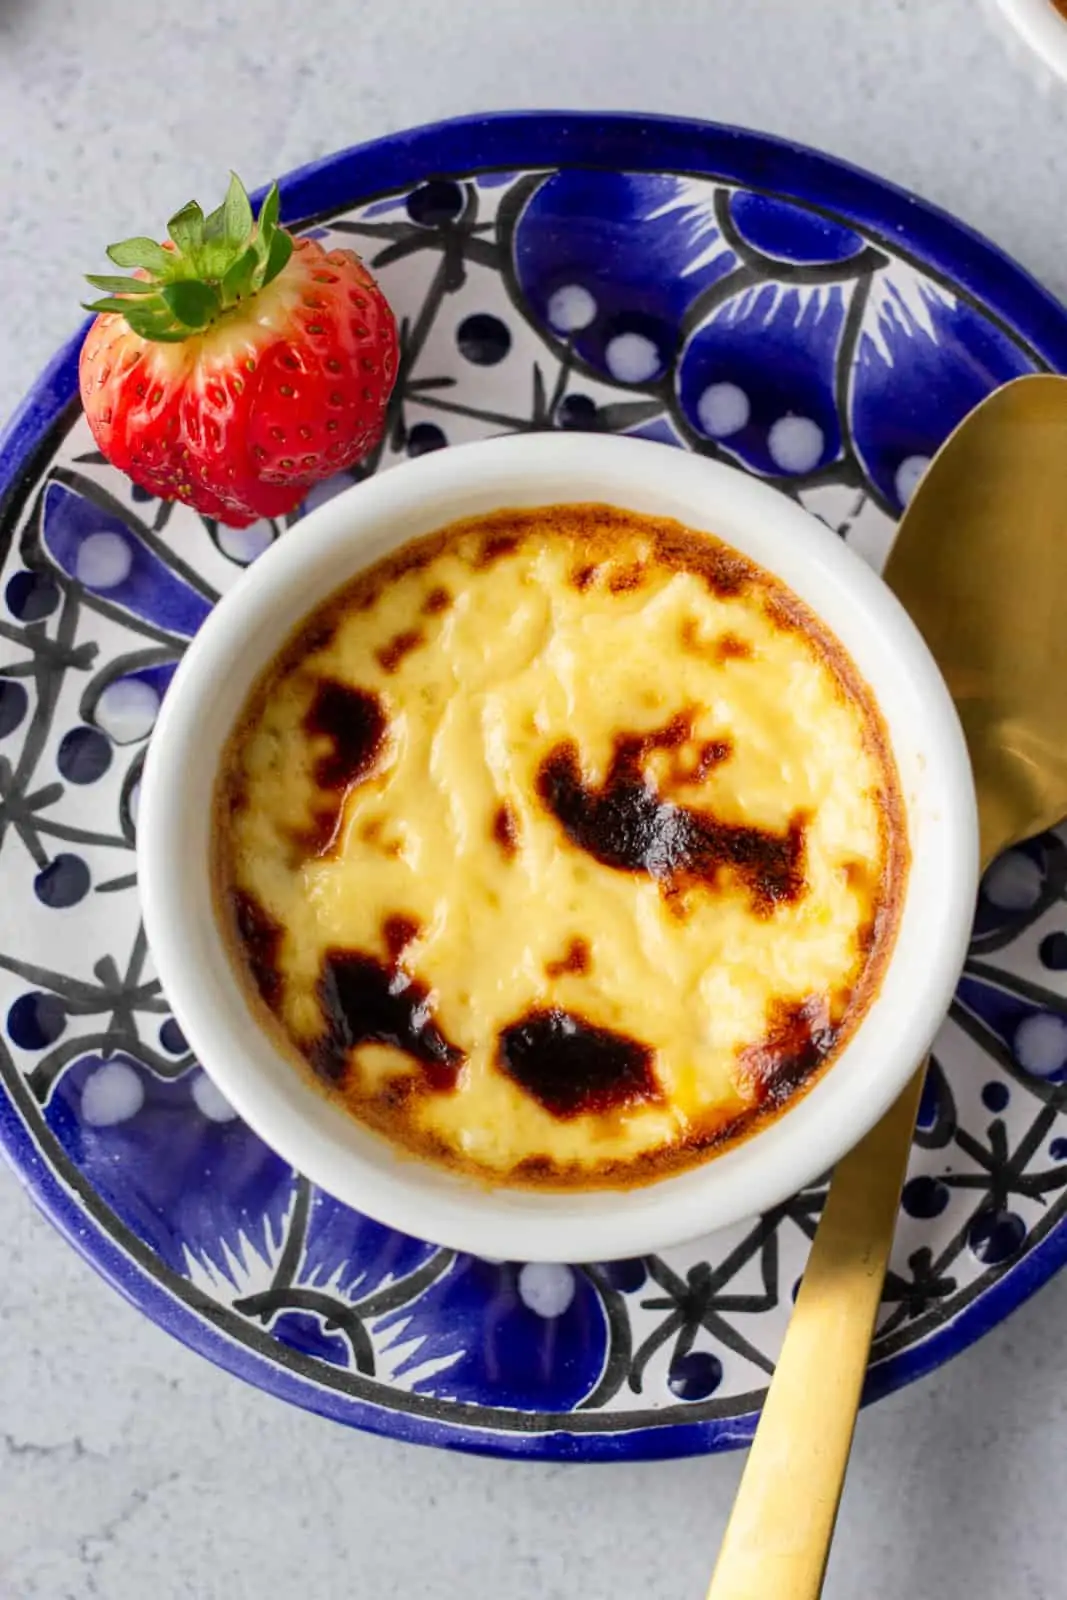 Overhead view of custard in a white ramekin on a blue plate with a gold spoon and strawberry garnish on the side.